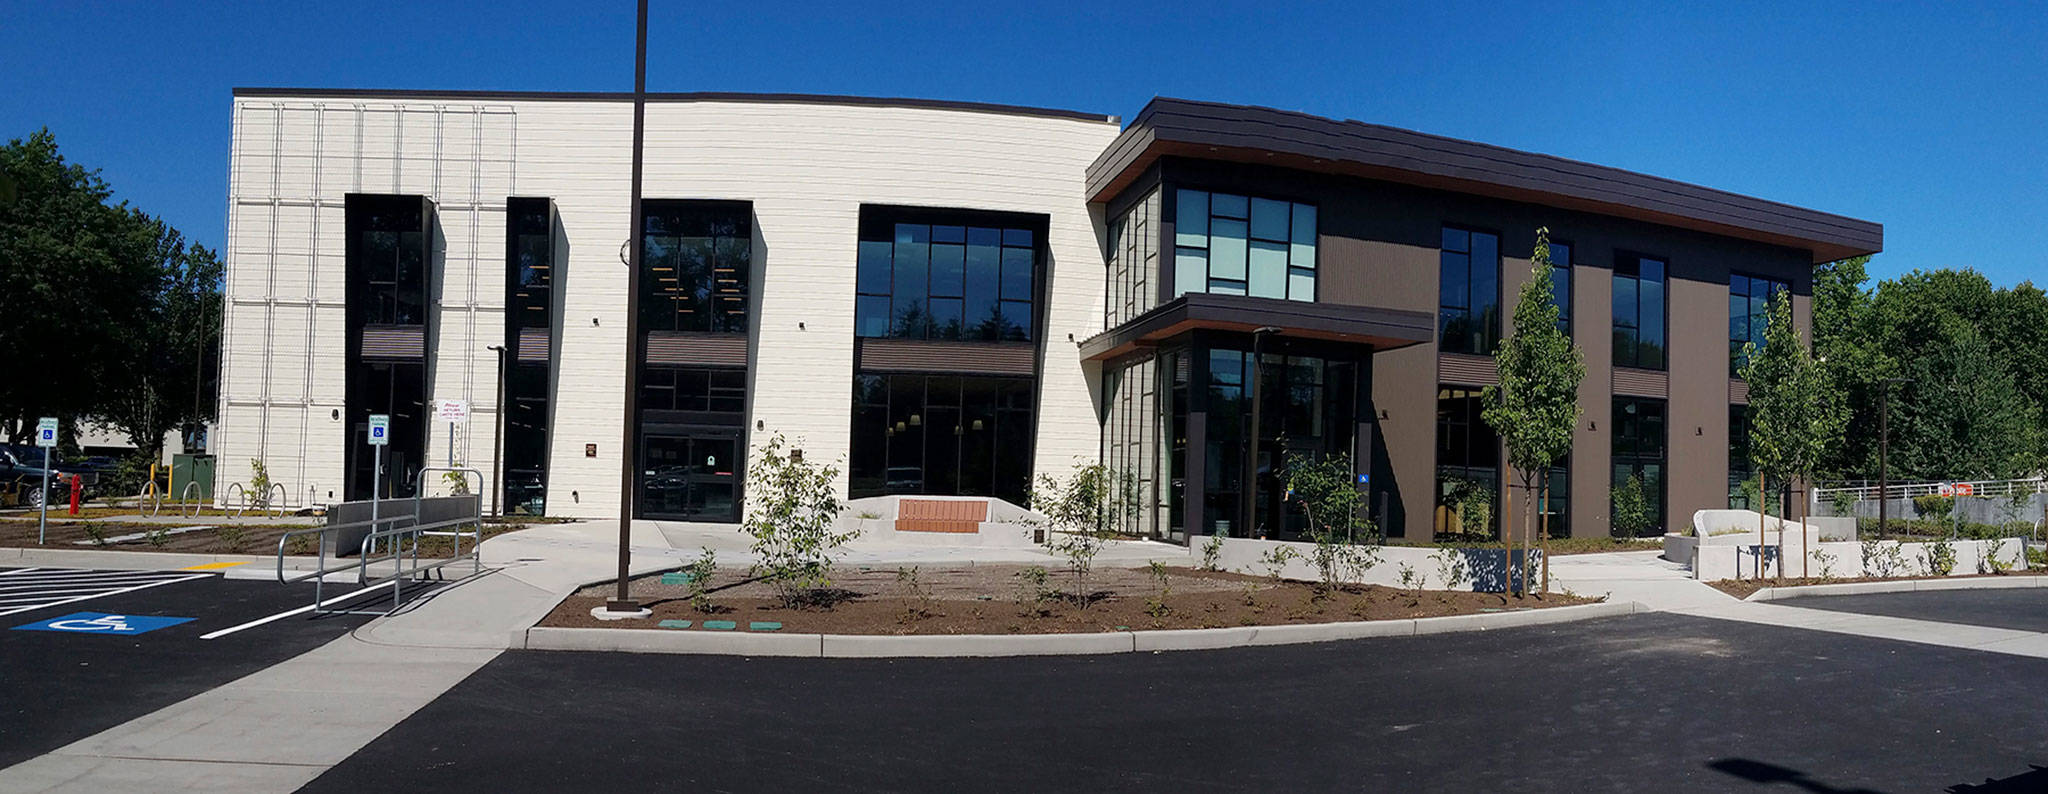 The 28,000-square-foot, $14.2 million facility will house Hopelink’s administrative team, along with its Redmond client services staff and food bank.